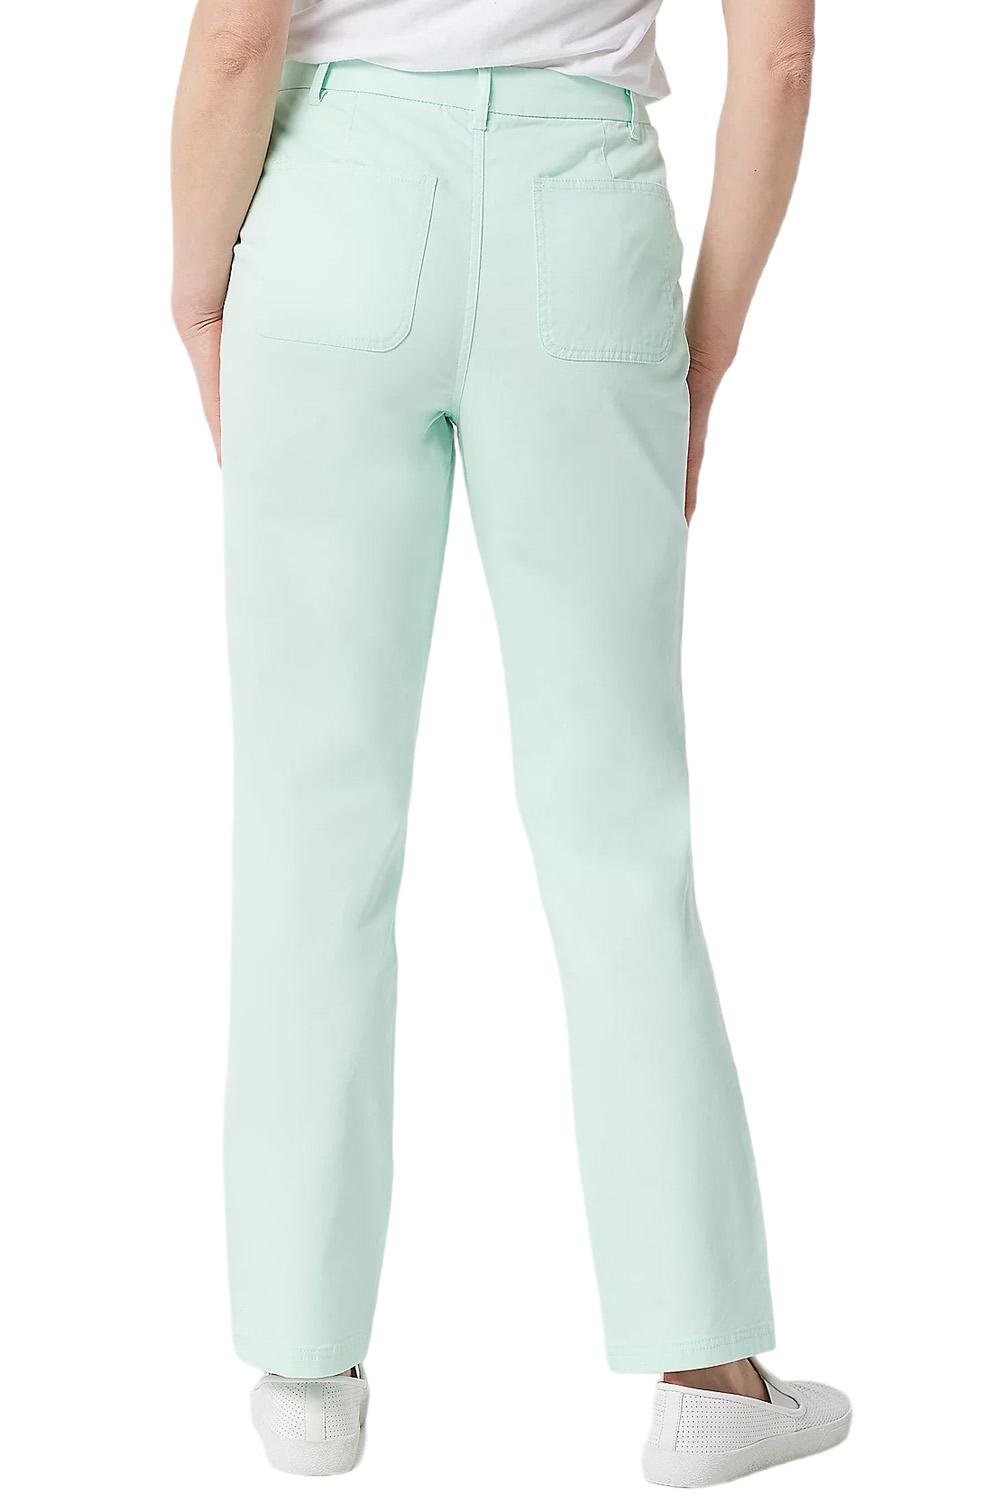 Denim & Co. Active Duo Stretch Pant with Side Pocket Black